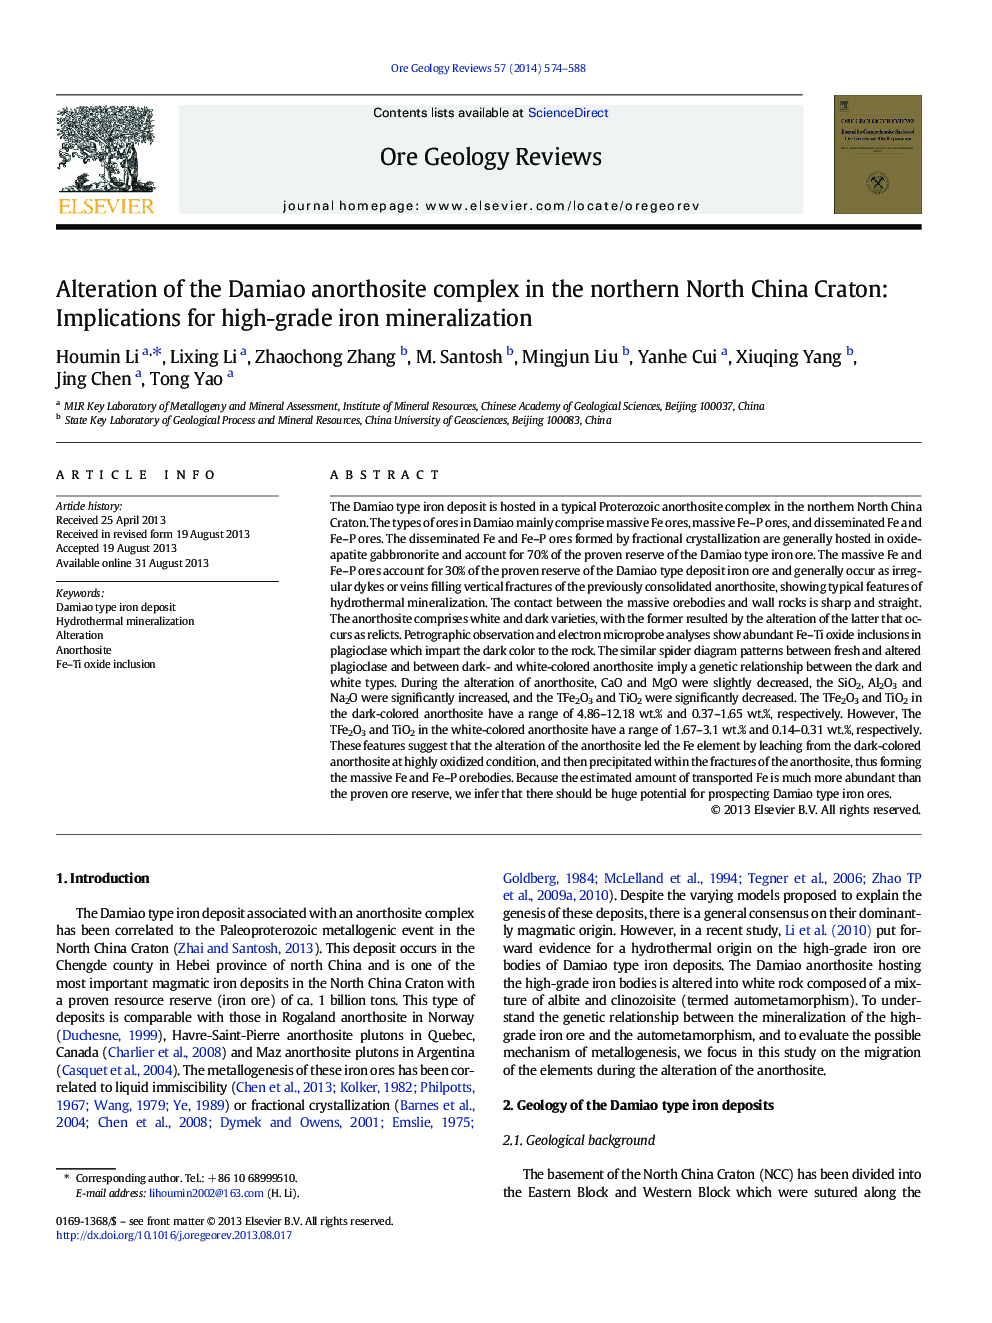 Alteration of the Damiao anorthosite complex in the northern North China Craton: Implications for high-grade iron mineralization